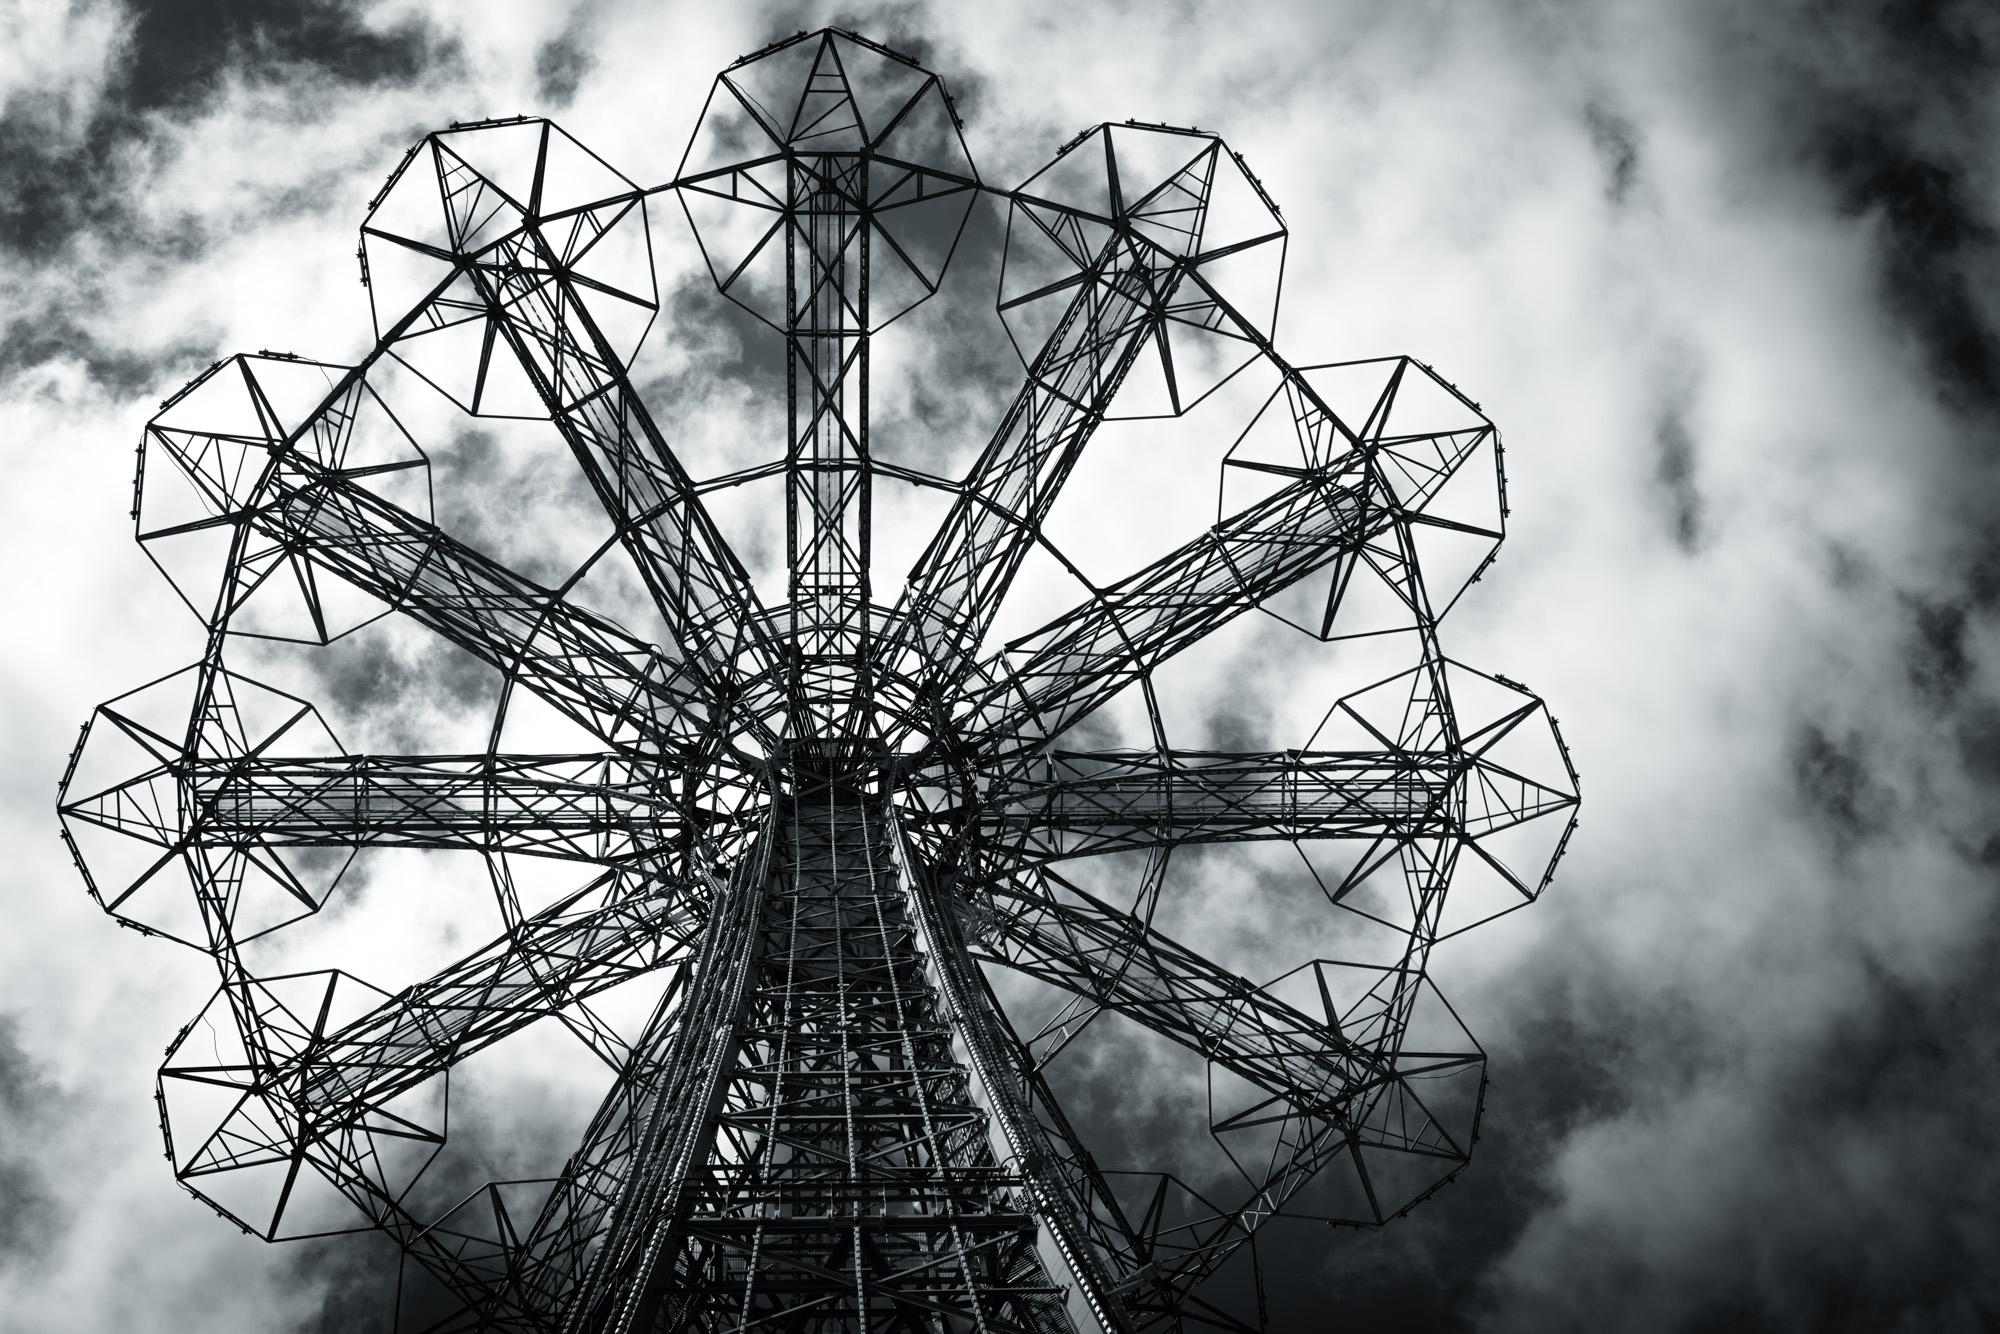 Beautiful, detailed limited edition black and white toned archival pigment print. This photograph was taken of the old deserted parachute drop at Coney Island amusement part in the early spring of 2021. Title - Coney Skeleton

About:
Lewis’ artistic